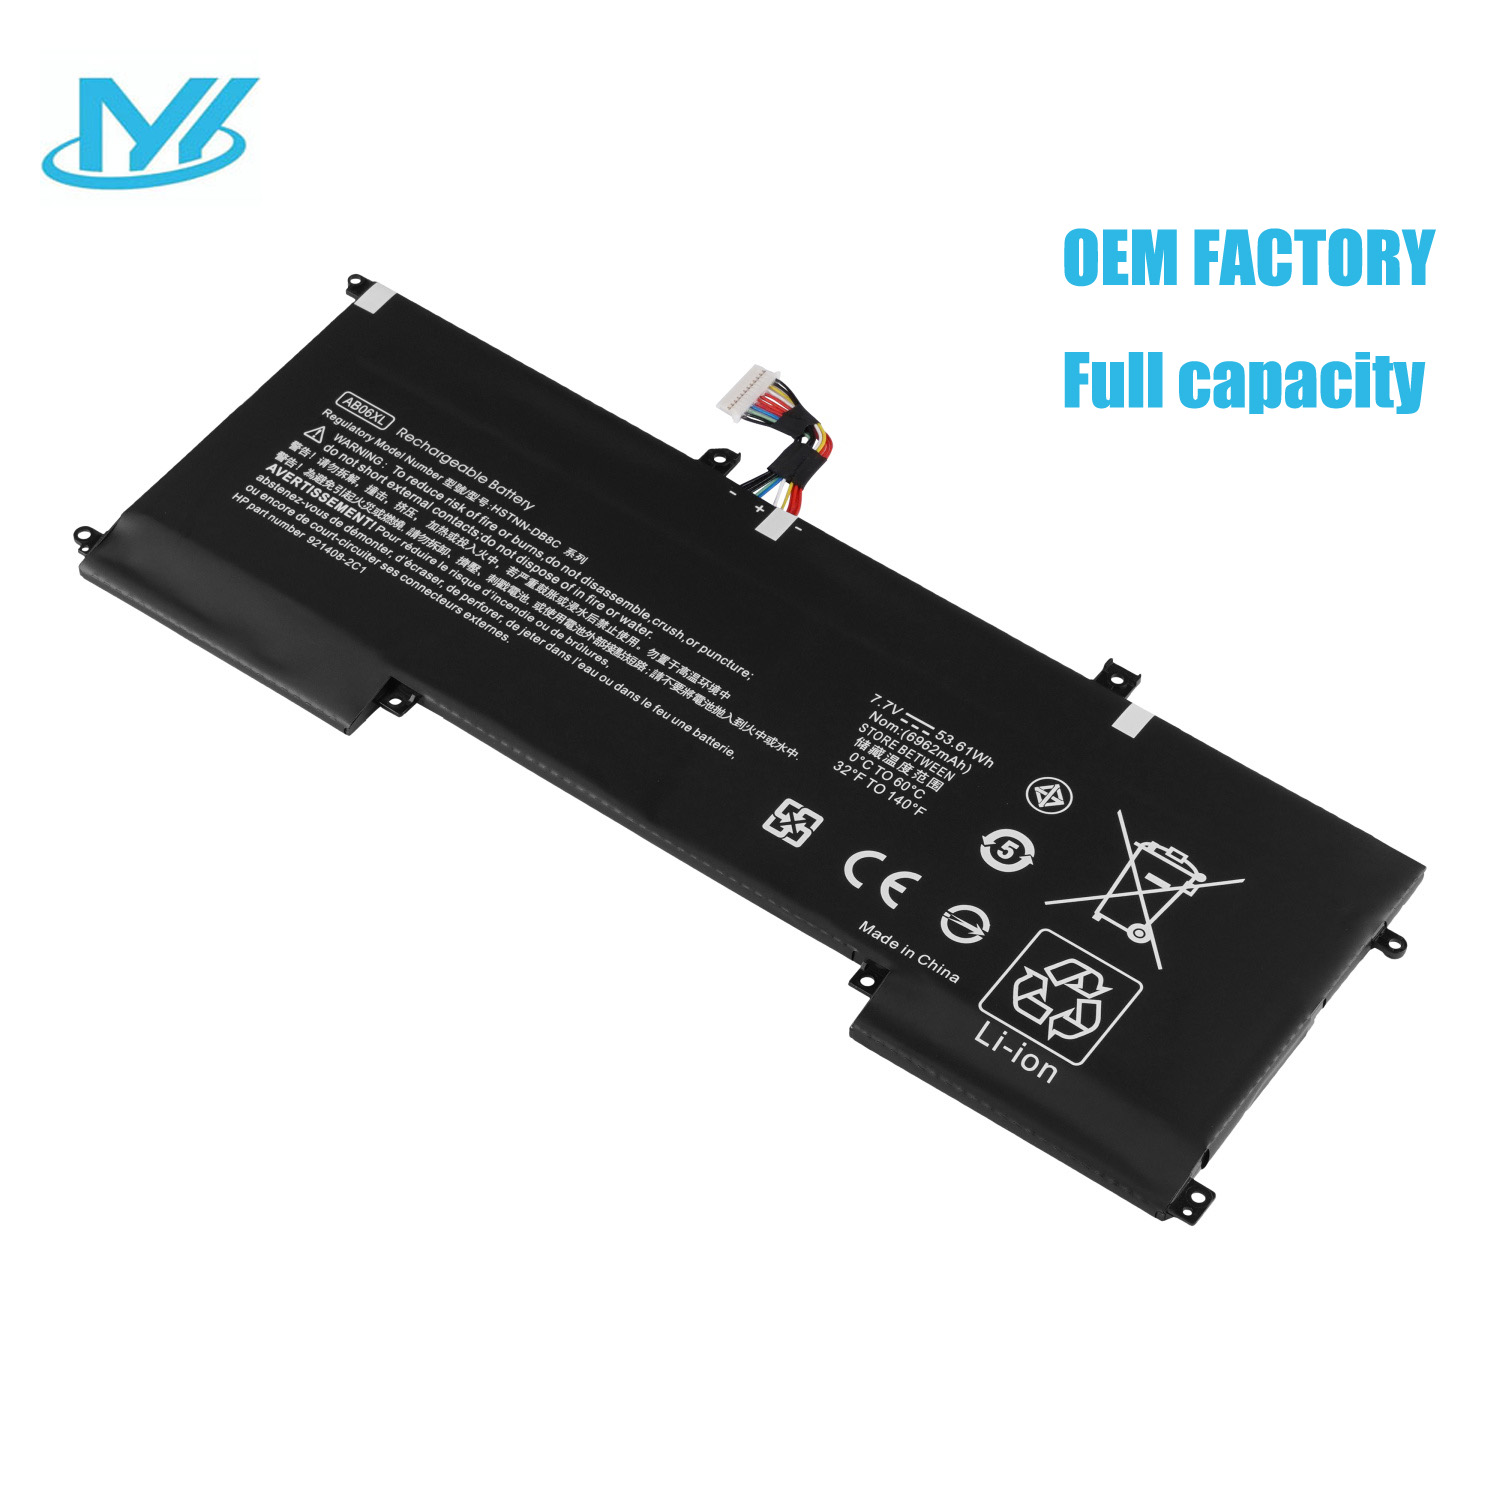 AB06XL rechargeable lithium ion Notebook battery Laptop battery AB06XL 921408-2C1 921438-855 TPN-I128 HSTNN-DB8C TPNI128 7.7V 53.6Wh for HP laptop Envy 13 2017 13-AD019TU 13-AD022TU 13-AD023TU